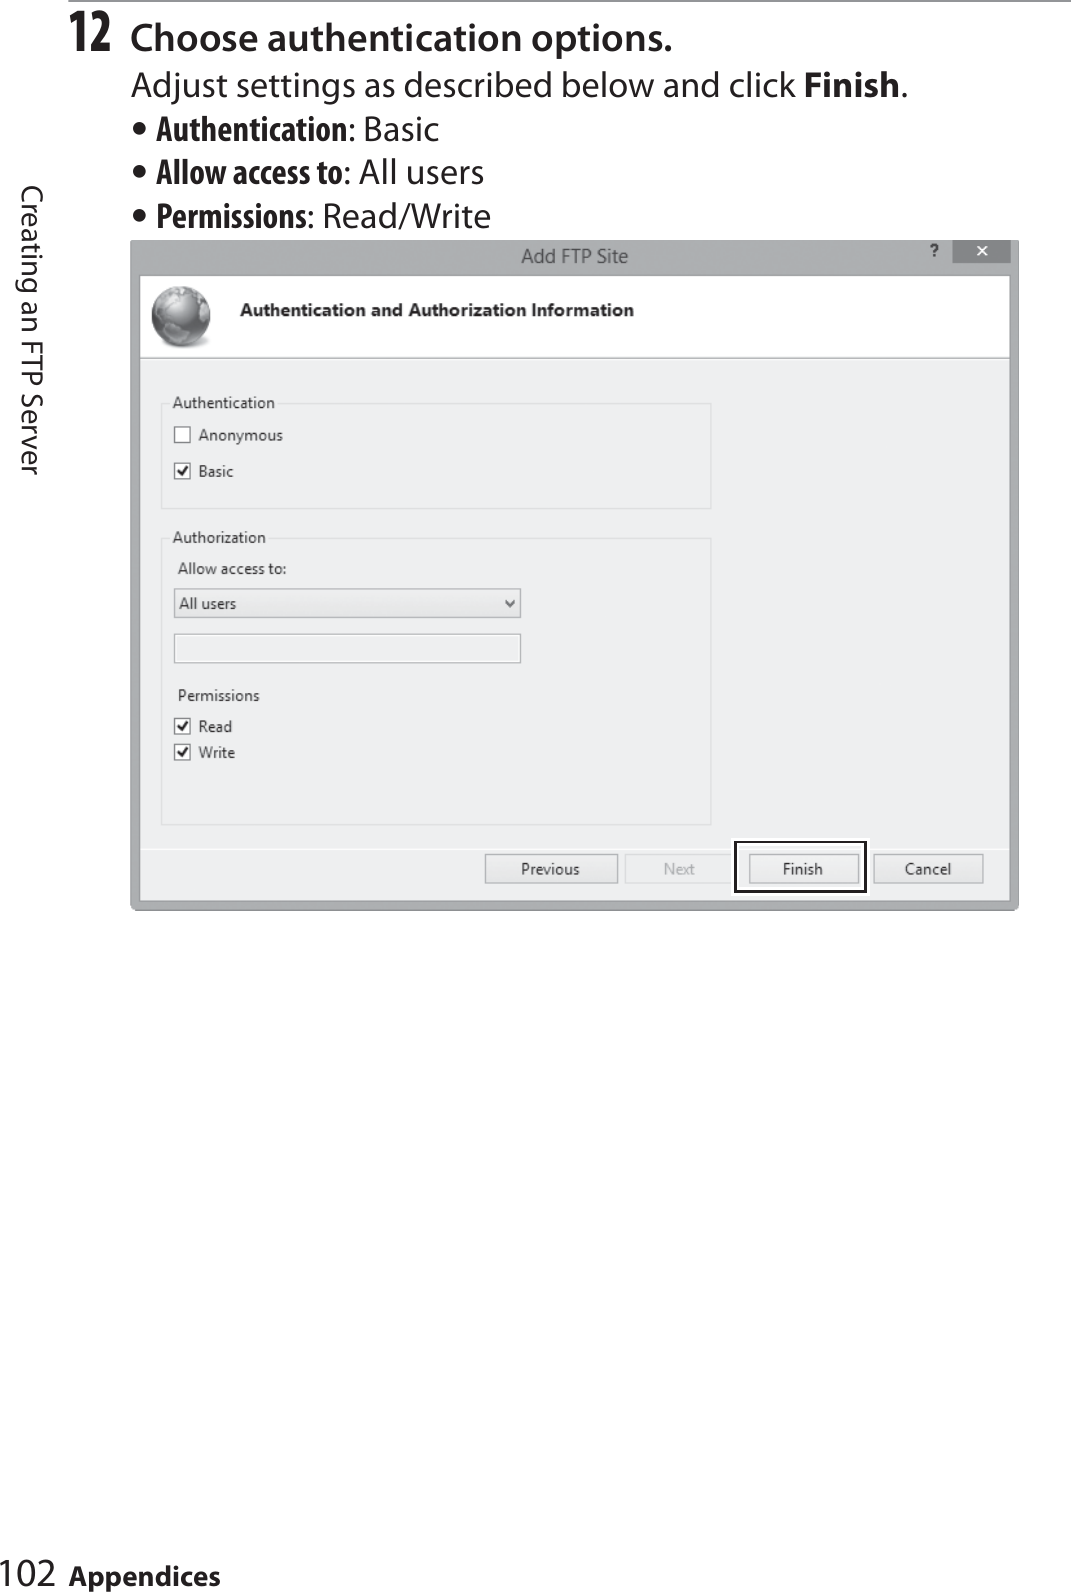 102 AppendicesCreating an FTP Server12Choose authentication options.Adjust settings as described below and click Finish.•Authentication: Basic•Allow access to: All users•Permissions: Read/Write